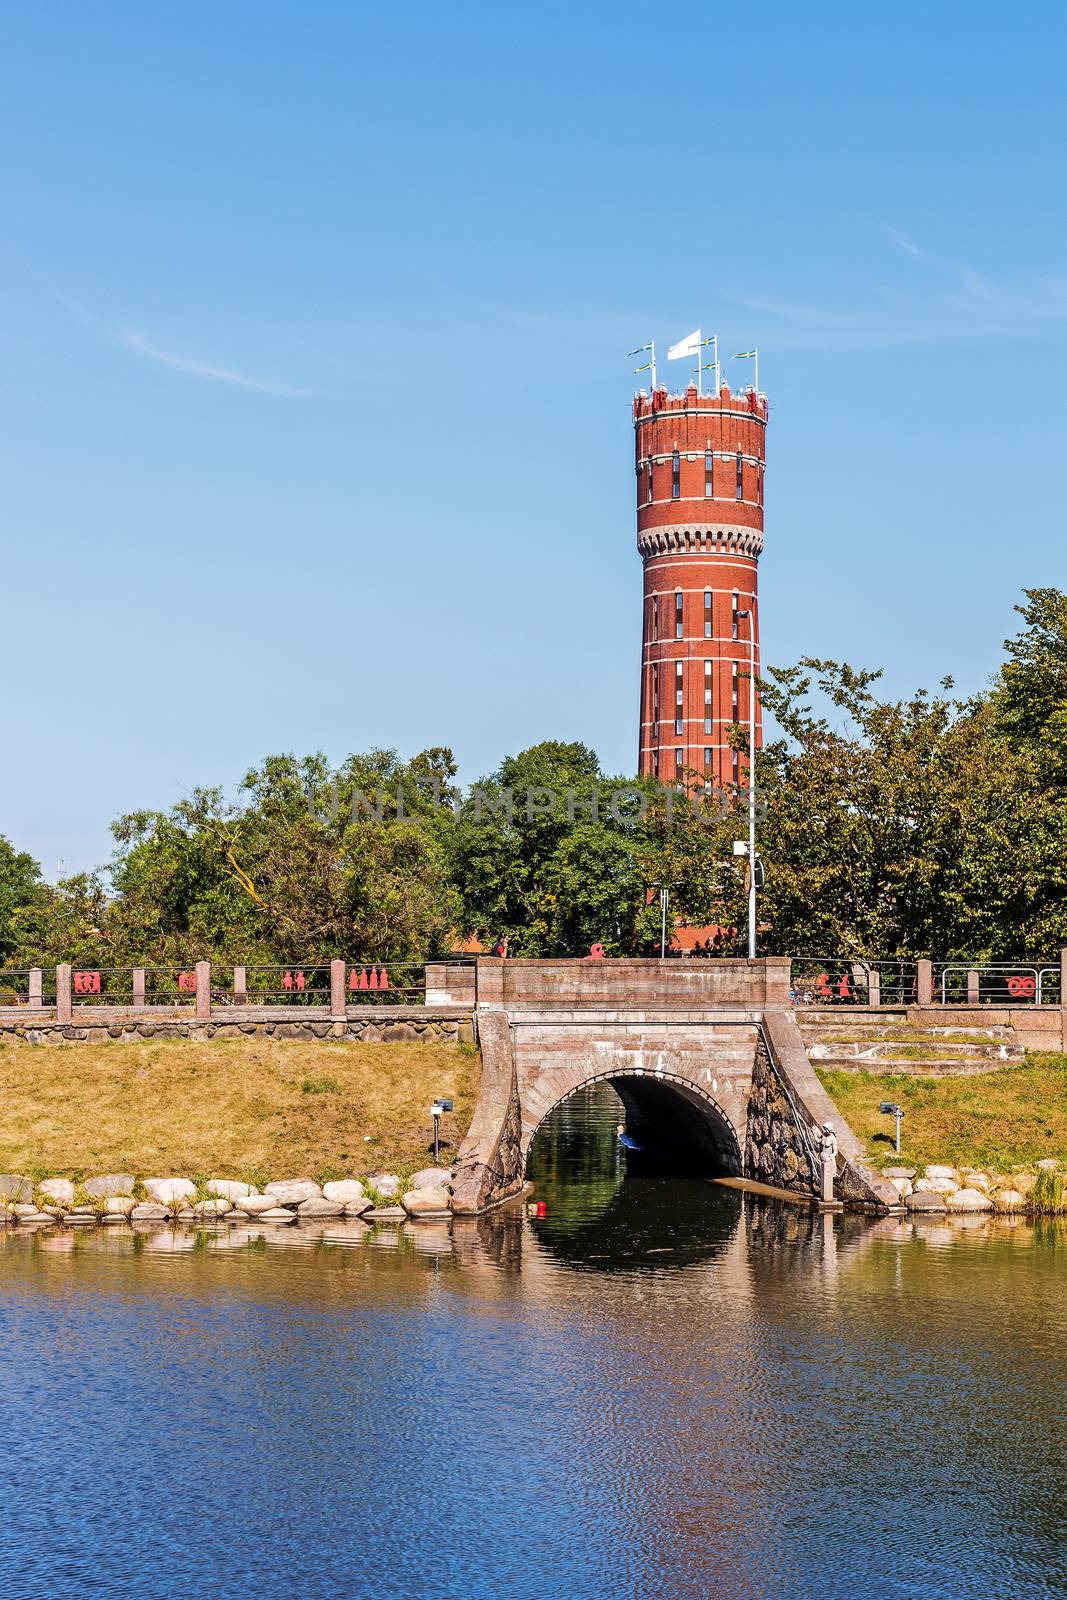 Ancient water tower in Kalmar, Sweden constructed in the years 1897-1900, in use until 1972, converted into the residential building with 11 apartments of different sizes.